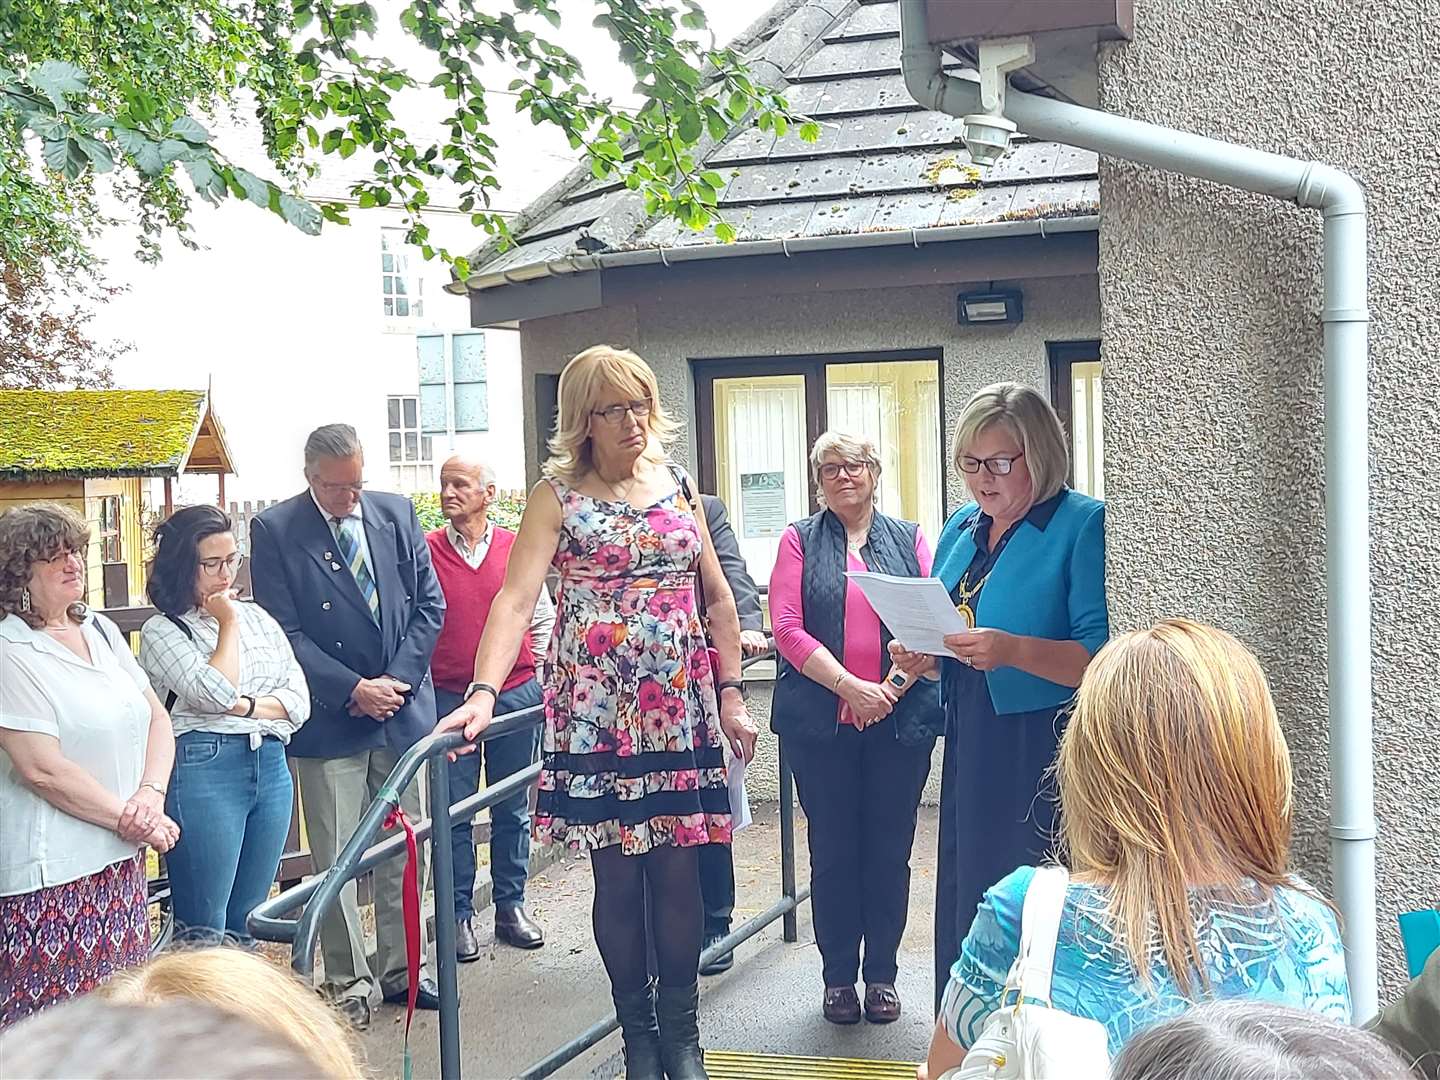 Chairwoman of the board for Networks of Wellbeing Sandra Brantingham (left), service manager Fiona Alderson (centre) and Provost Judy Whyte during the opening speeches.